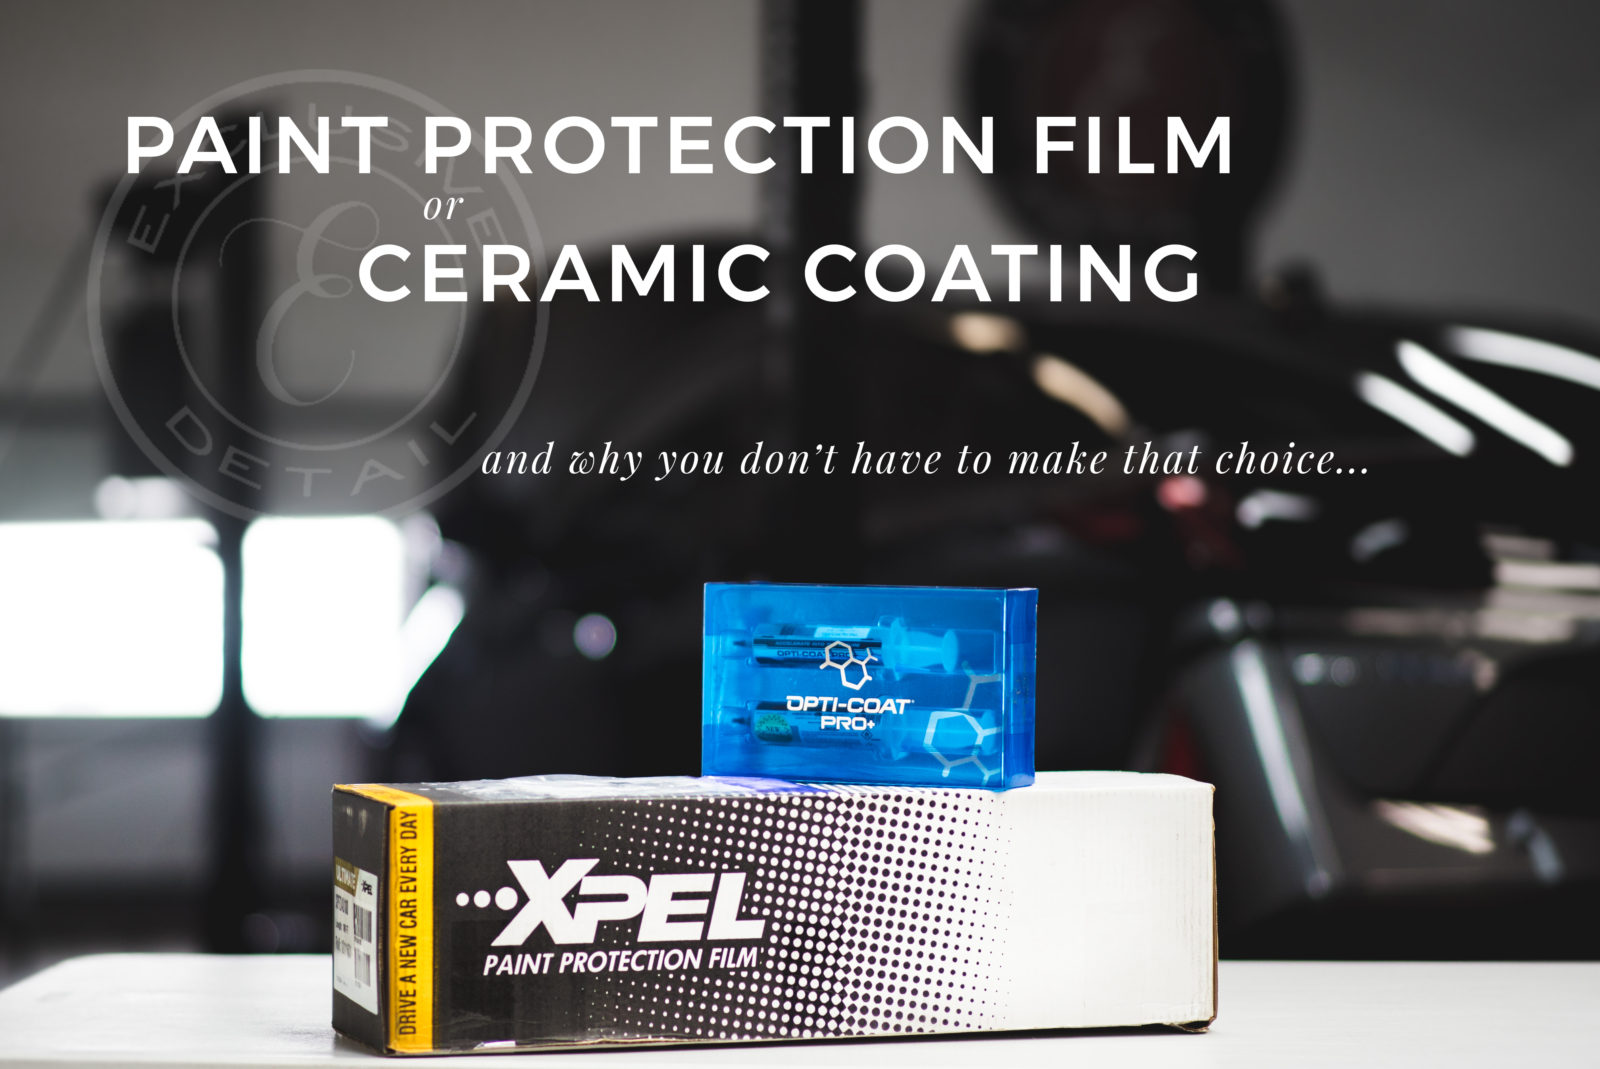 PPF vs Ceramic Coating: Which Is Better for Car Paint Protection?